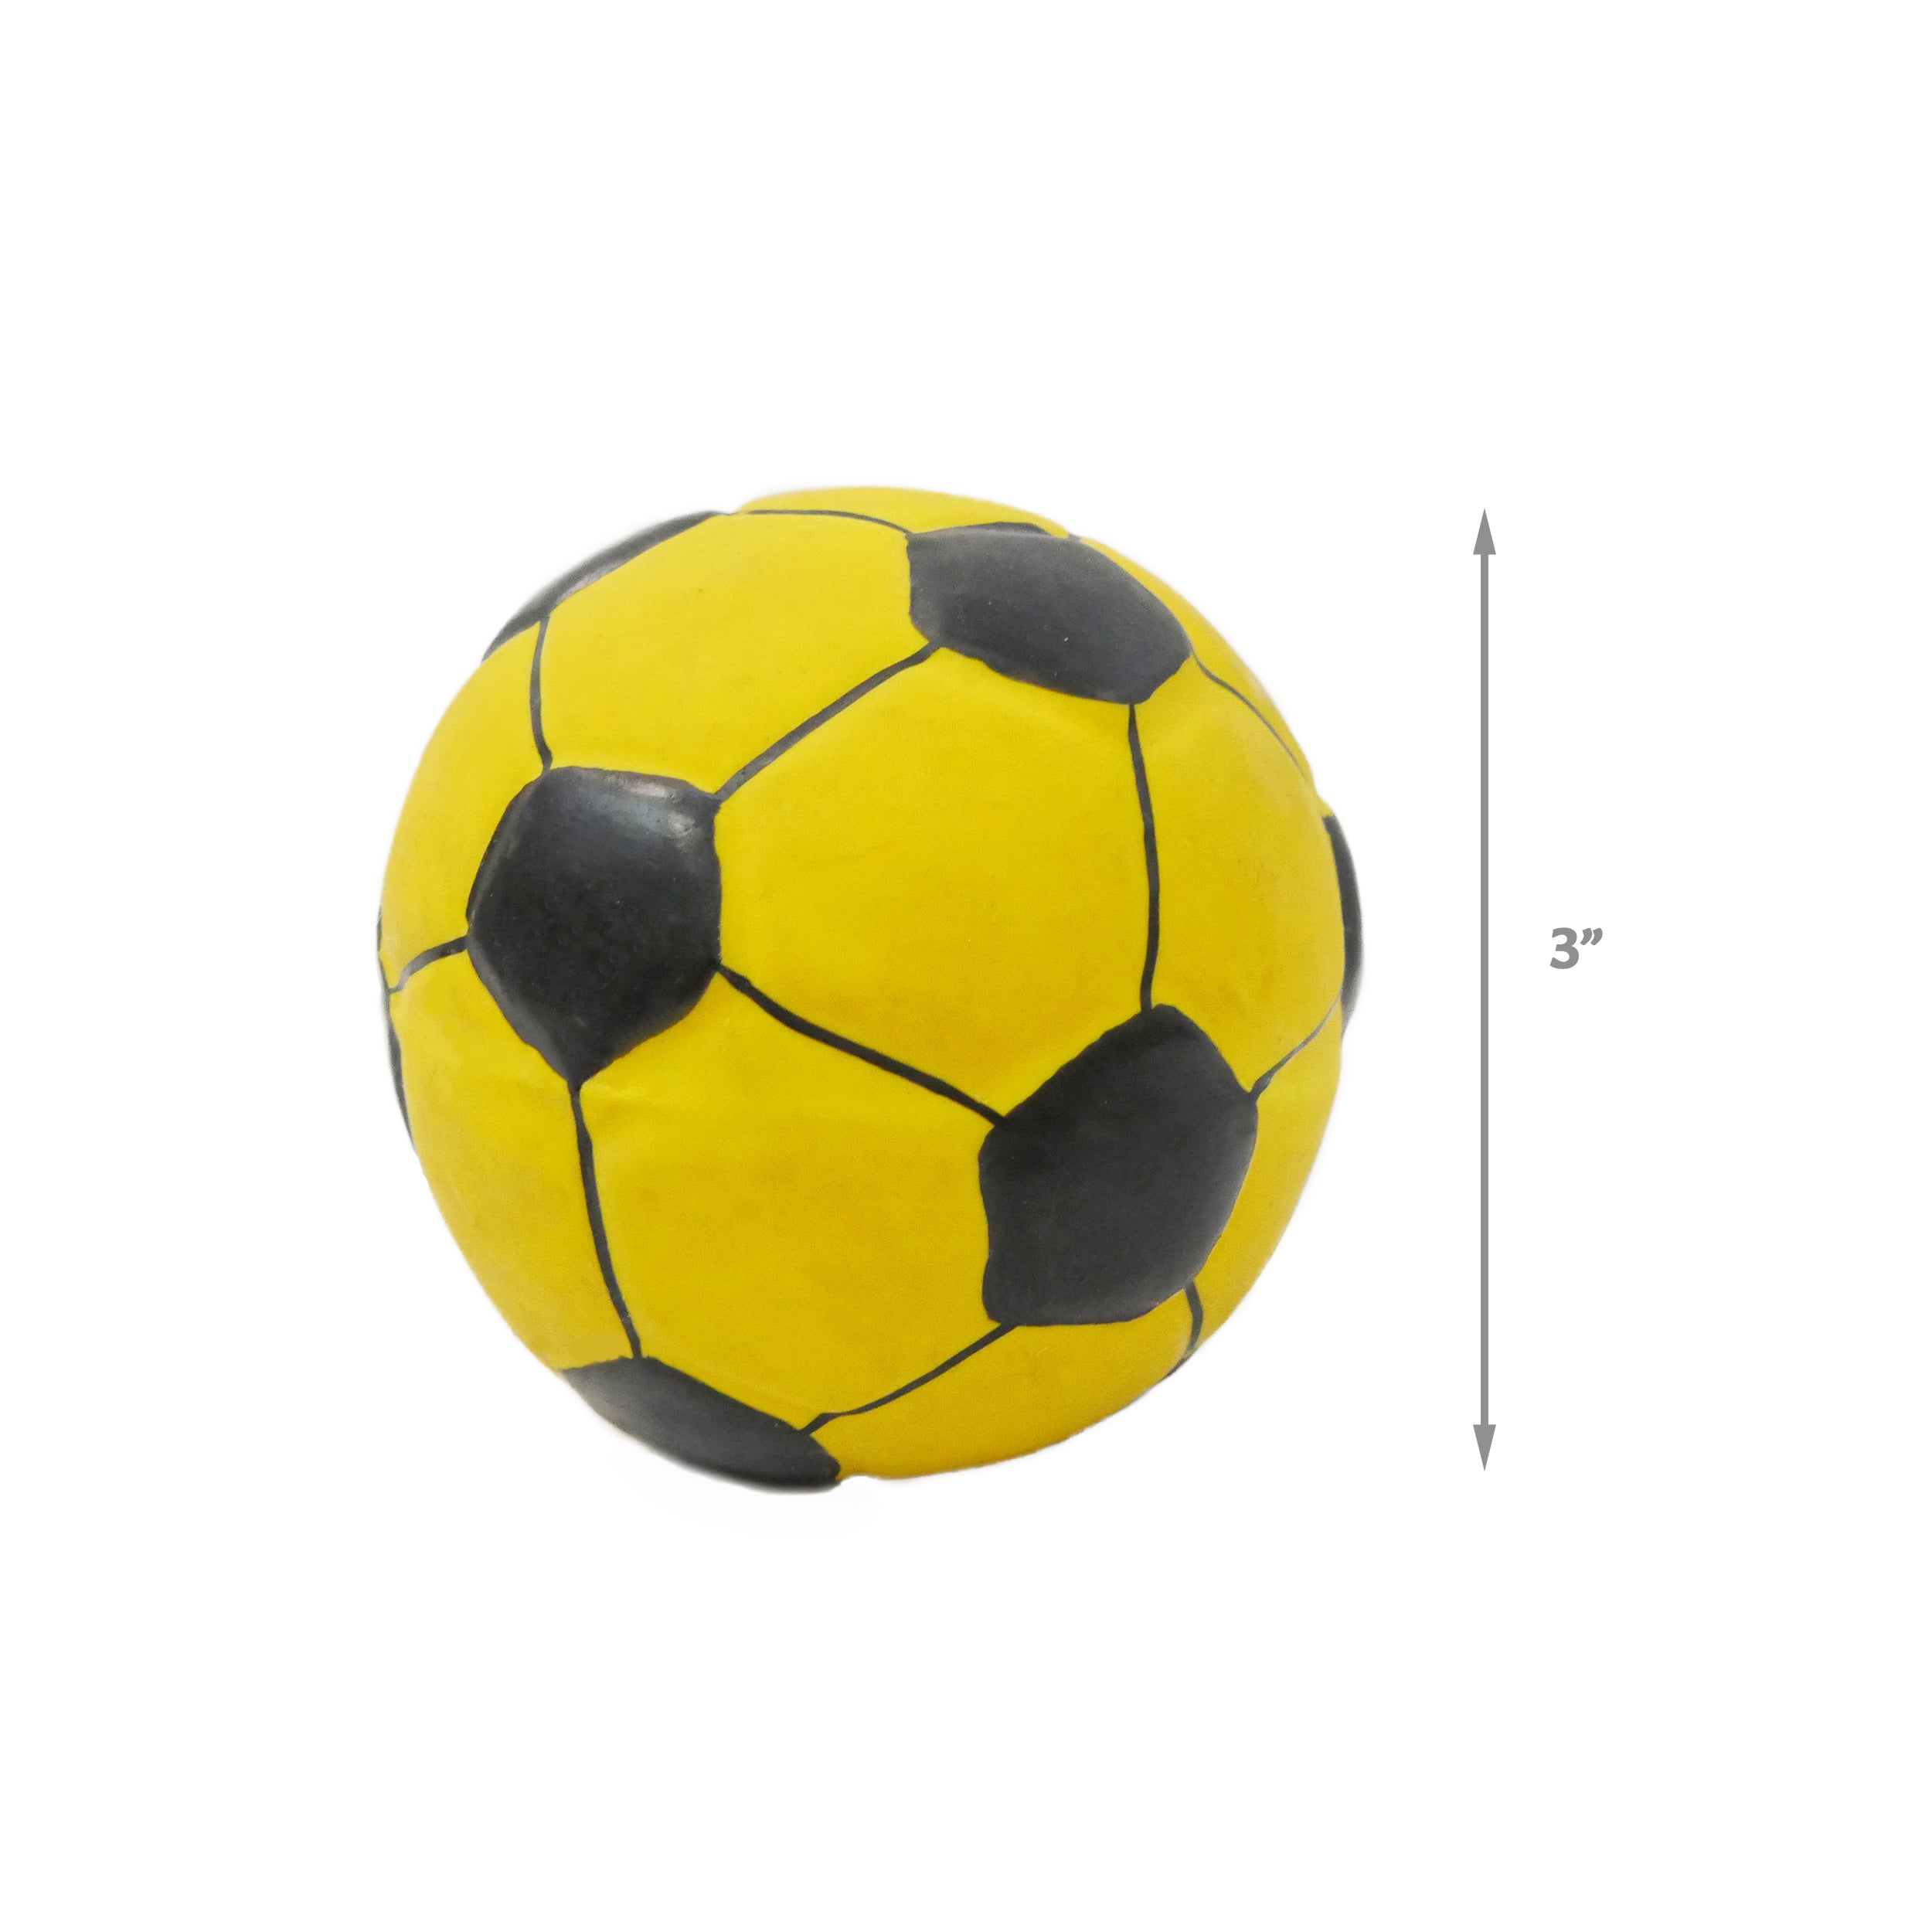 [Dog toy] yellow rubber soccer ball toy